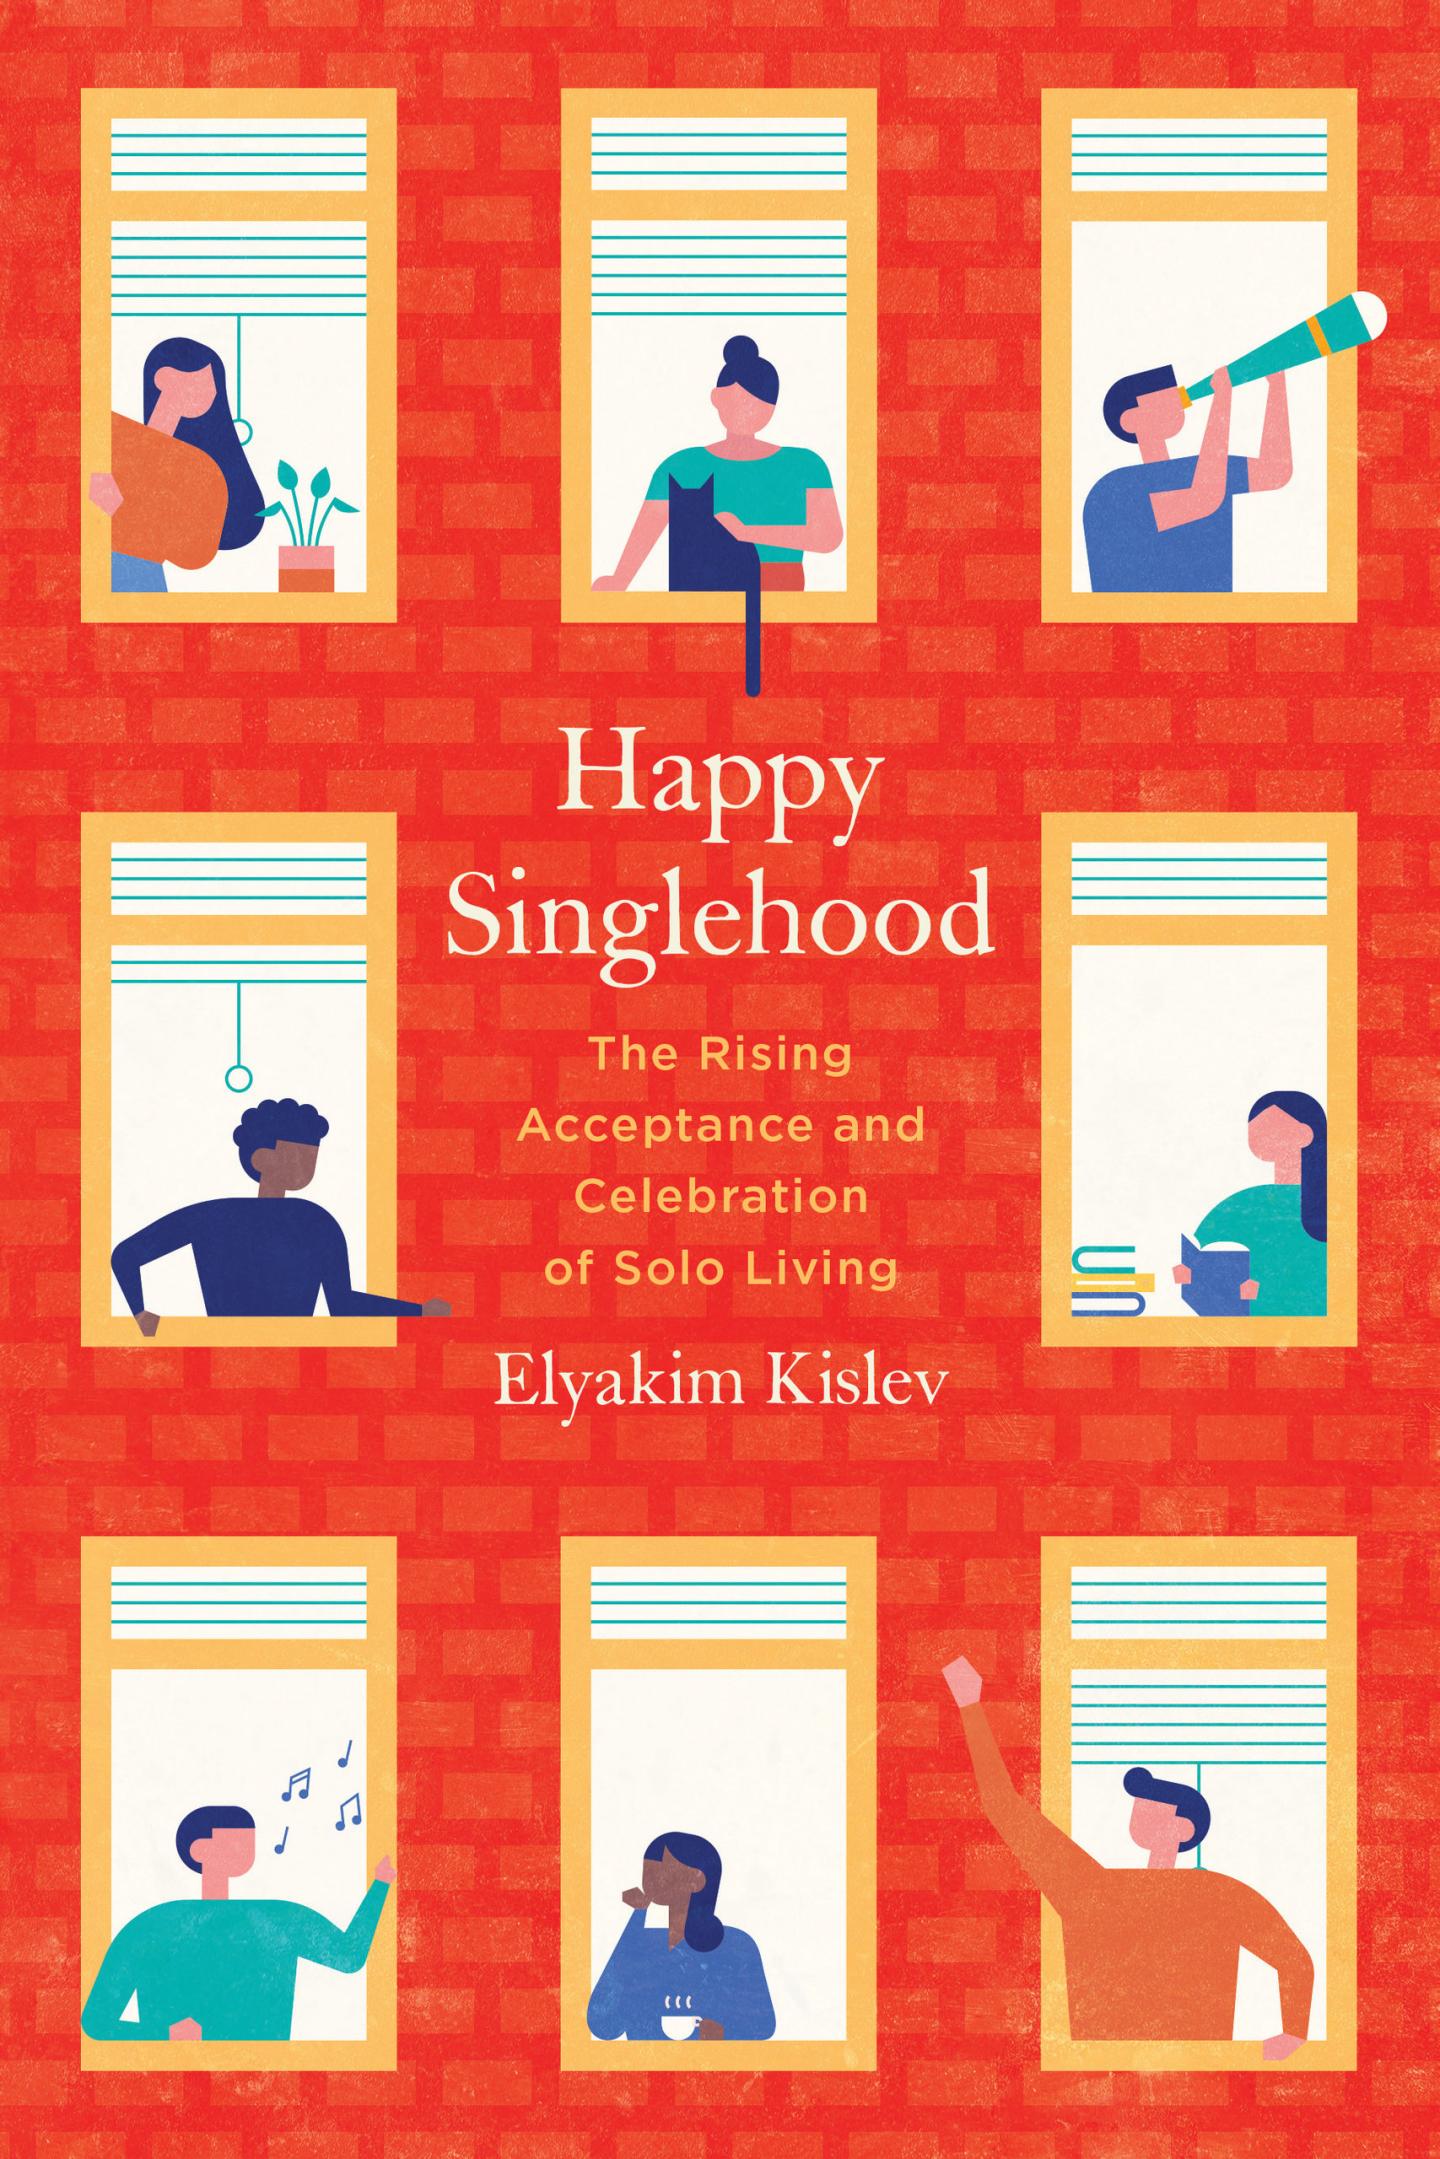 Professor Kislev's New Book: Happy Singlehood: The Rising Acceptance and Celebration of Solo Living